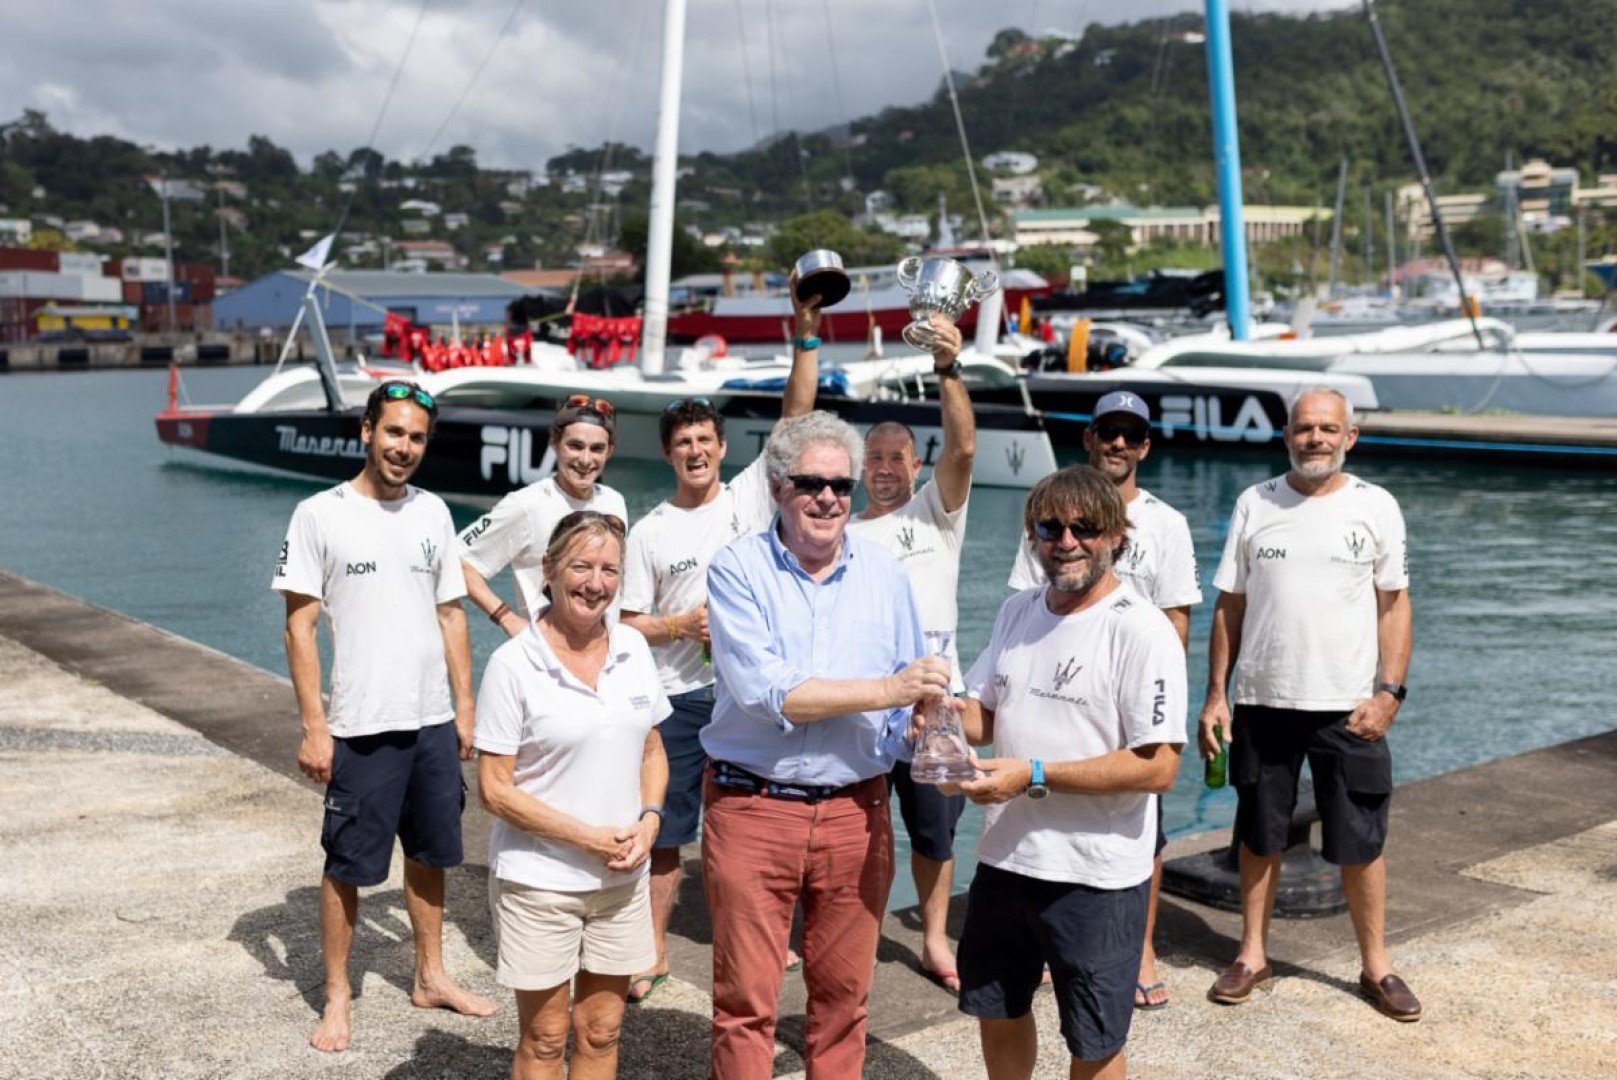 Andrew McIrvine presents Giovanni Soldini and team on Maserati Multi70 with the Multihull Line Honours trophy and keepsake in the RORC Transatlantic Race © Arthur Daniel/RORC